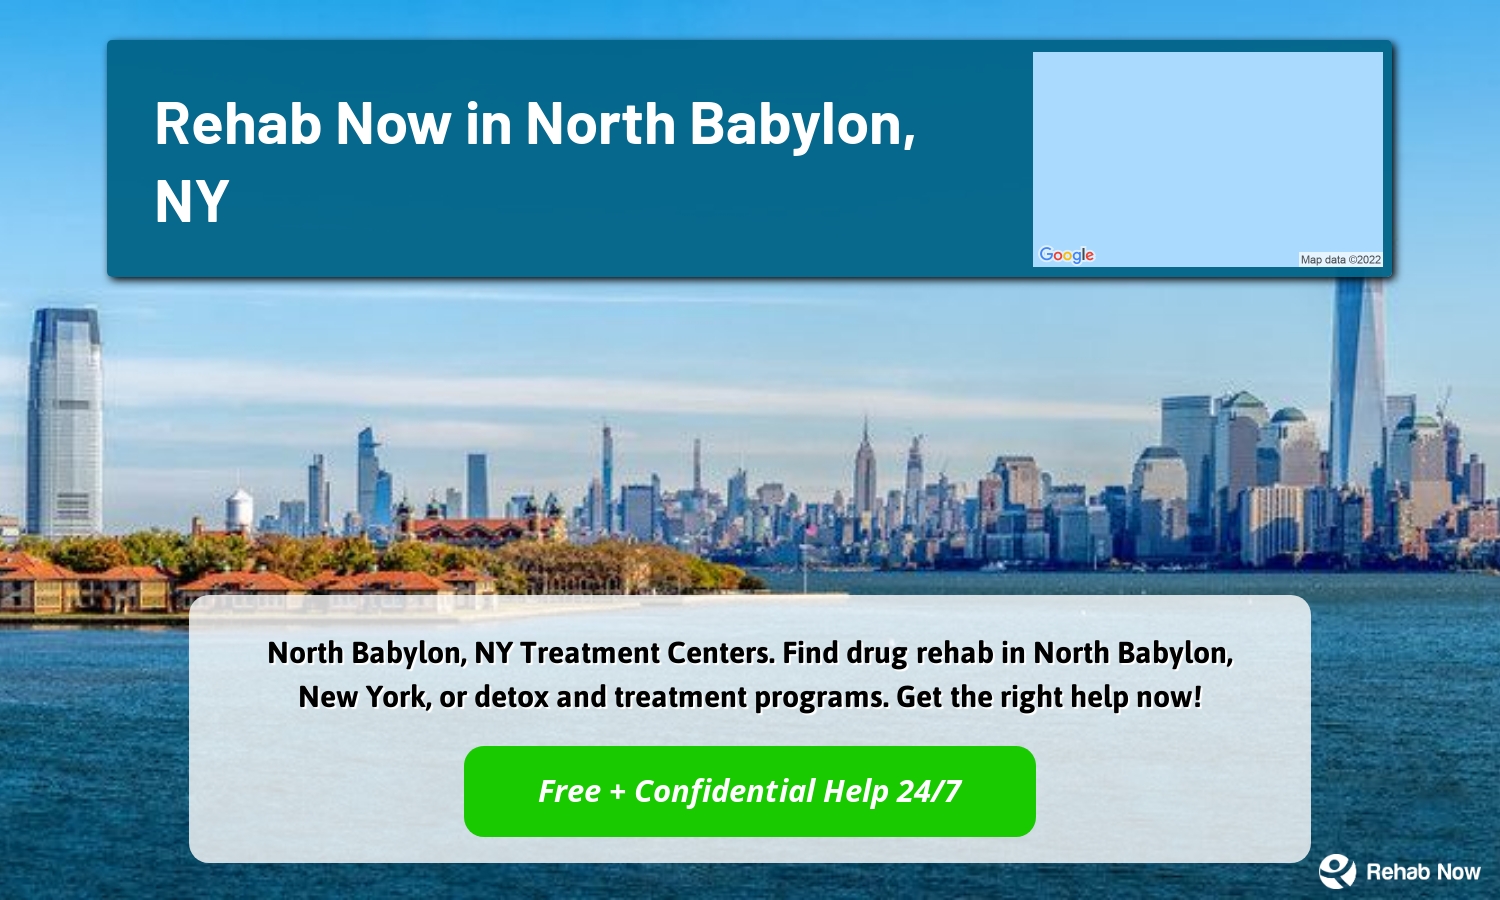 North Babylon, NY Treatment Centers. Find drug rehab in North Babylon, New York, or detox and treatment programs. Get the right help now!